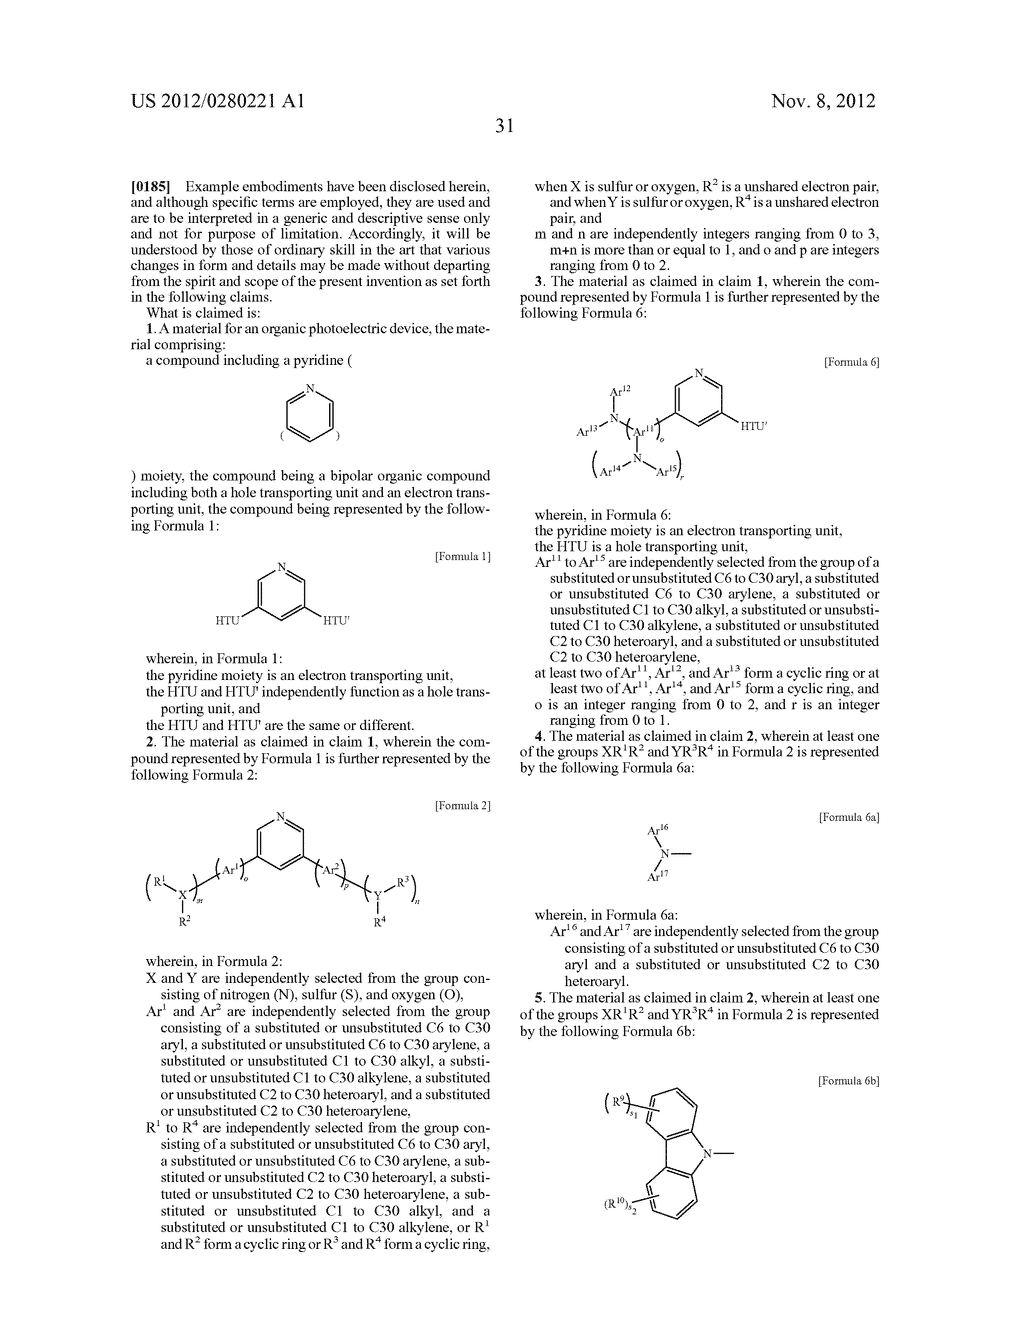 MATERIAL FOR ORGANIC PHOTOELECTRIC DEVICE INCLUDING ELECTRON TRANSPORTING     UNIT AND HOLE TRANSPORTING UNIT, AND ORGANIC PHOTOELECTRIC DEVICE     INCLUDING THE SAME - diagram, schematic, and image 35